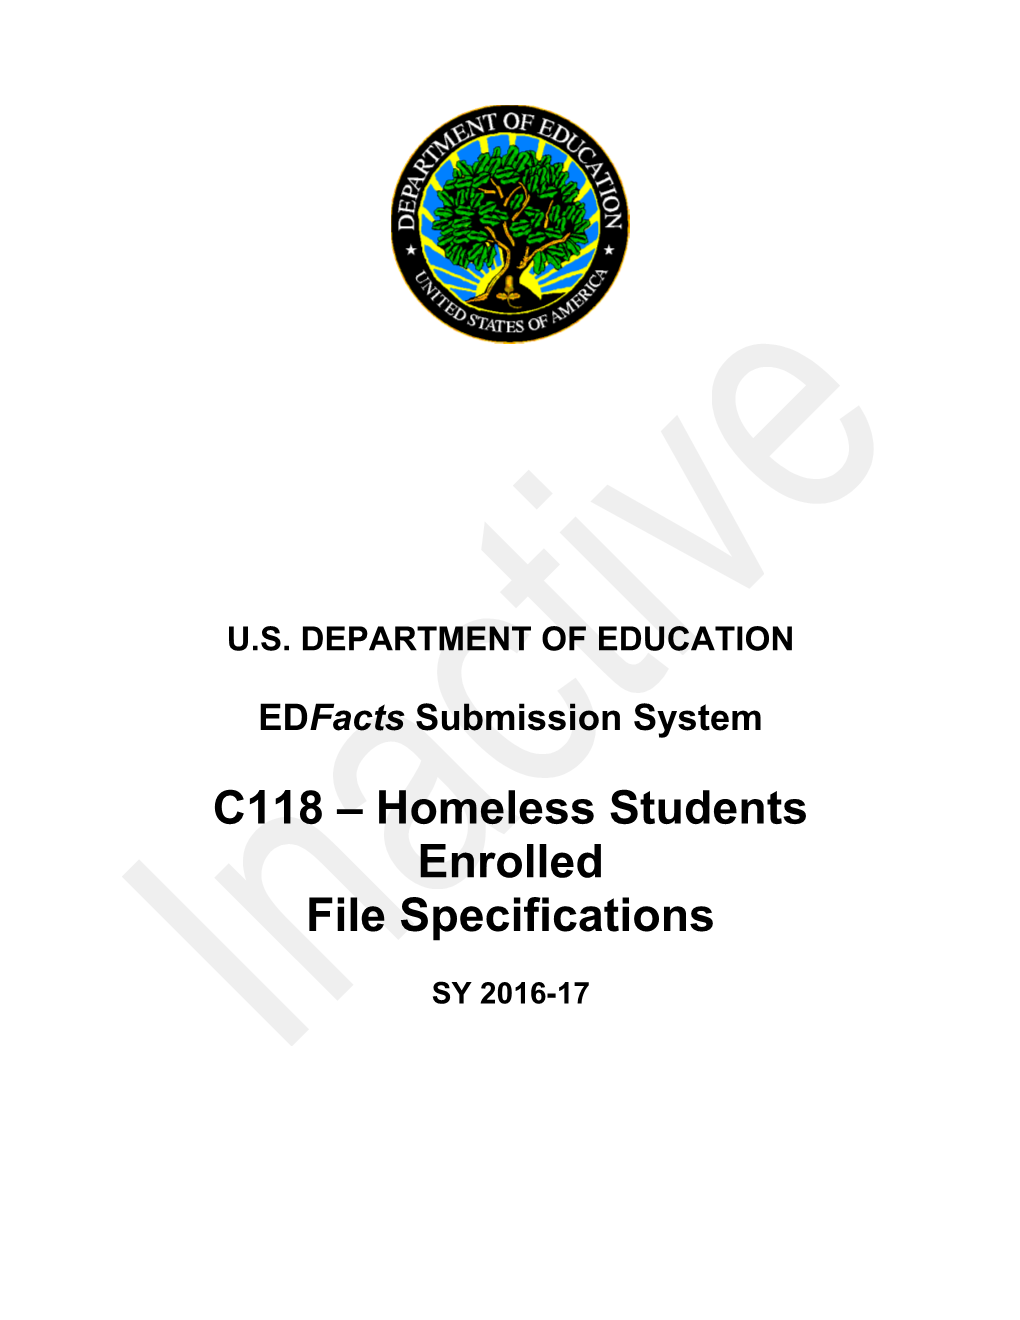 C118 - Homeless Students Enrolled File Specifications (Msword)